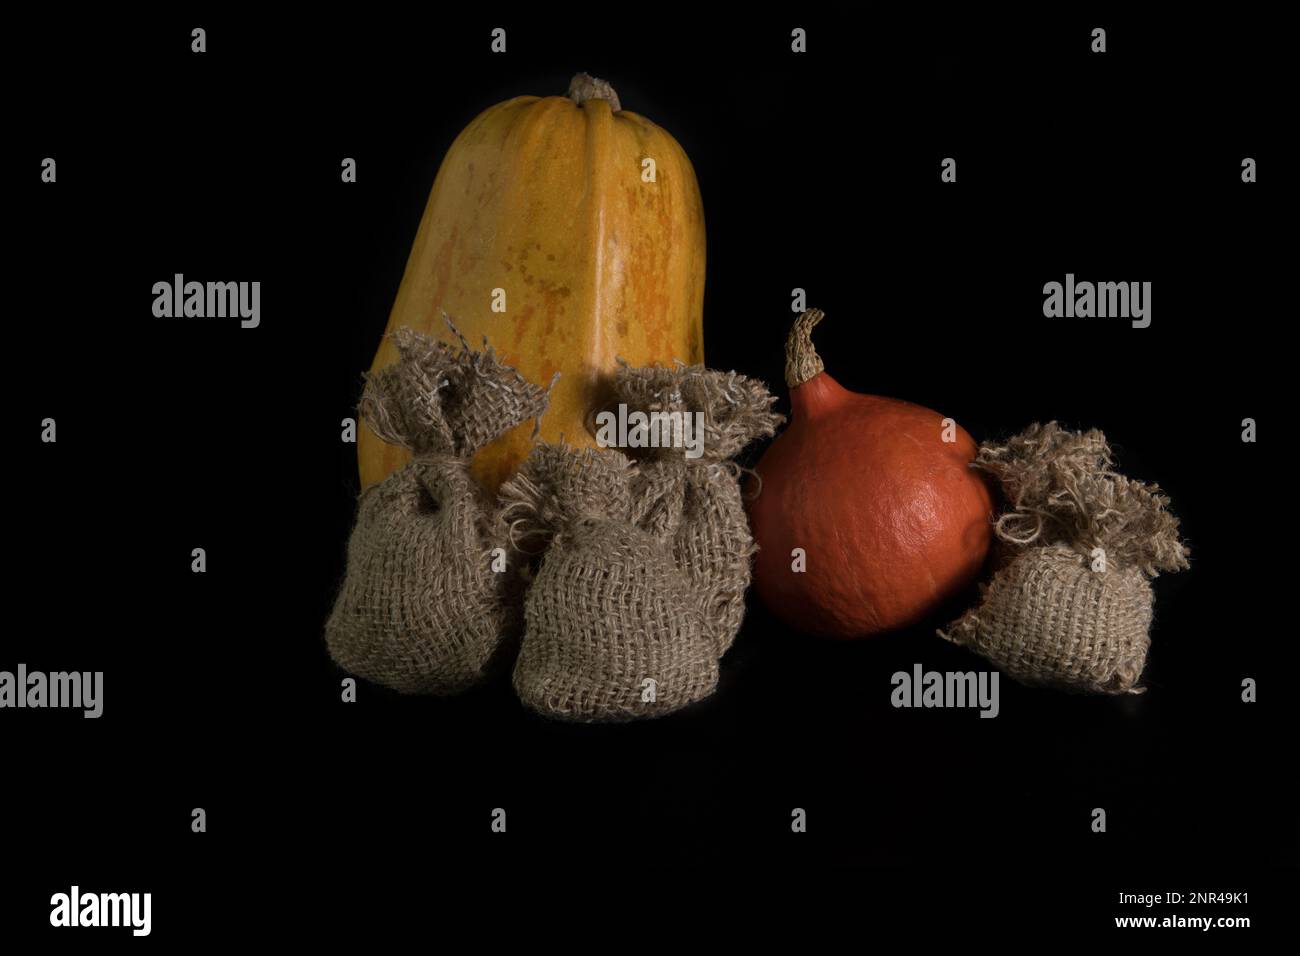 Pumpkins, and a jute bag on a black background. In studio Stock Photo